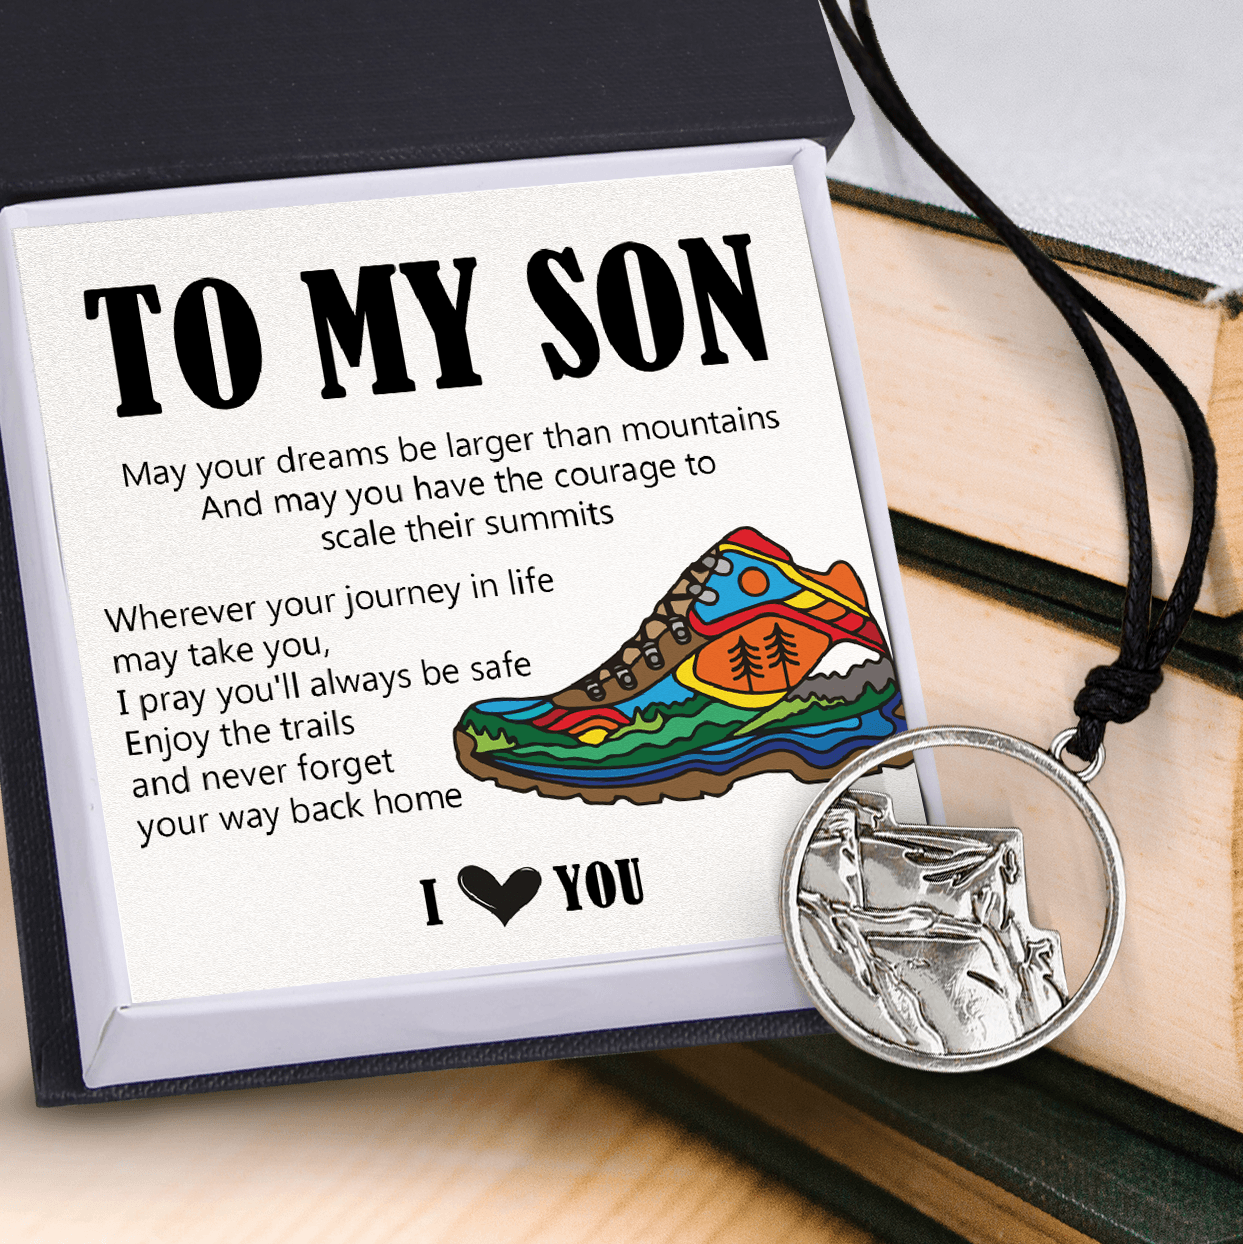 Mountain Necklace - Hiking - To My Son - Enjoy The Trails And Never Forget Your Way Back Home - Augnnl16005 - Gifts Holder